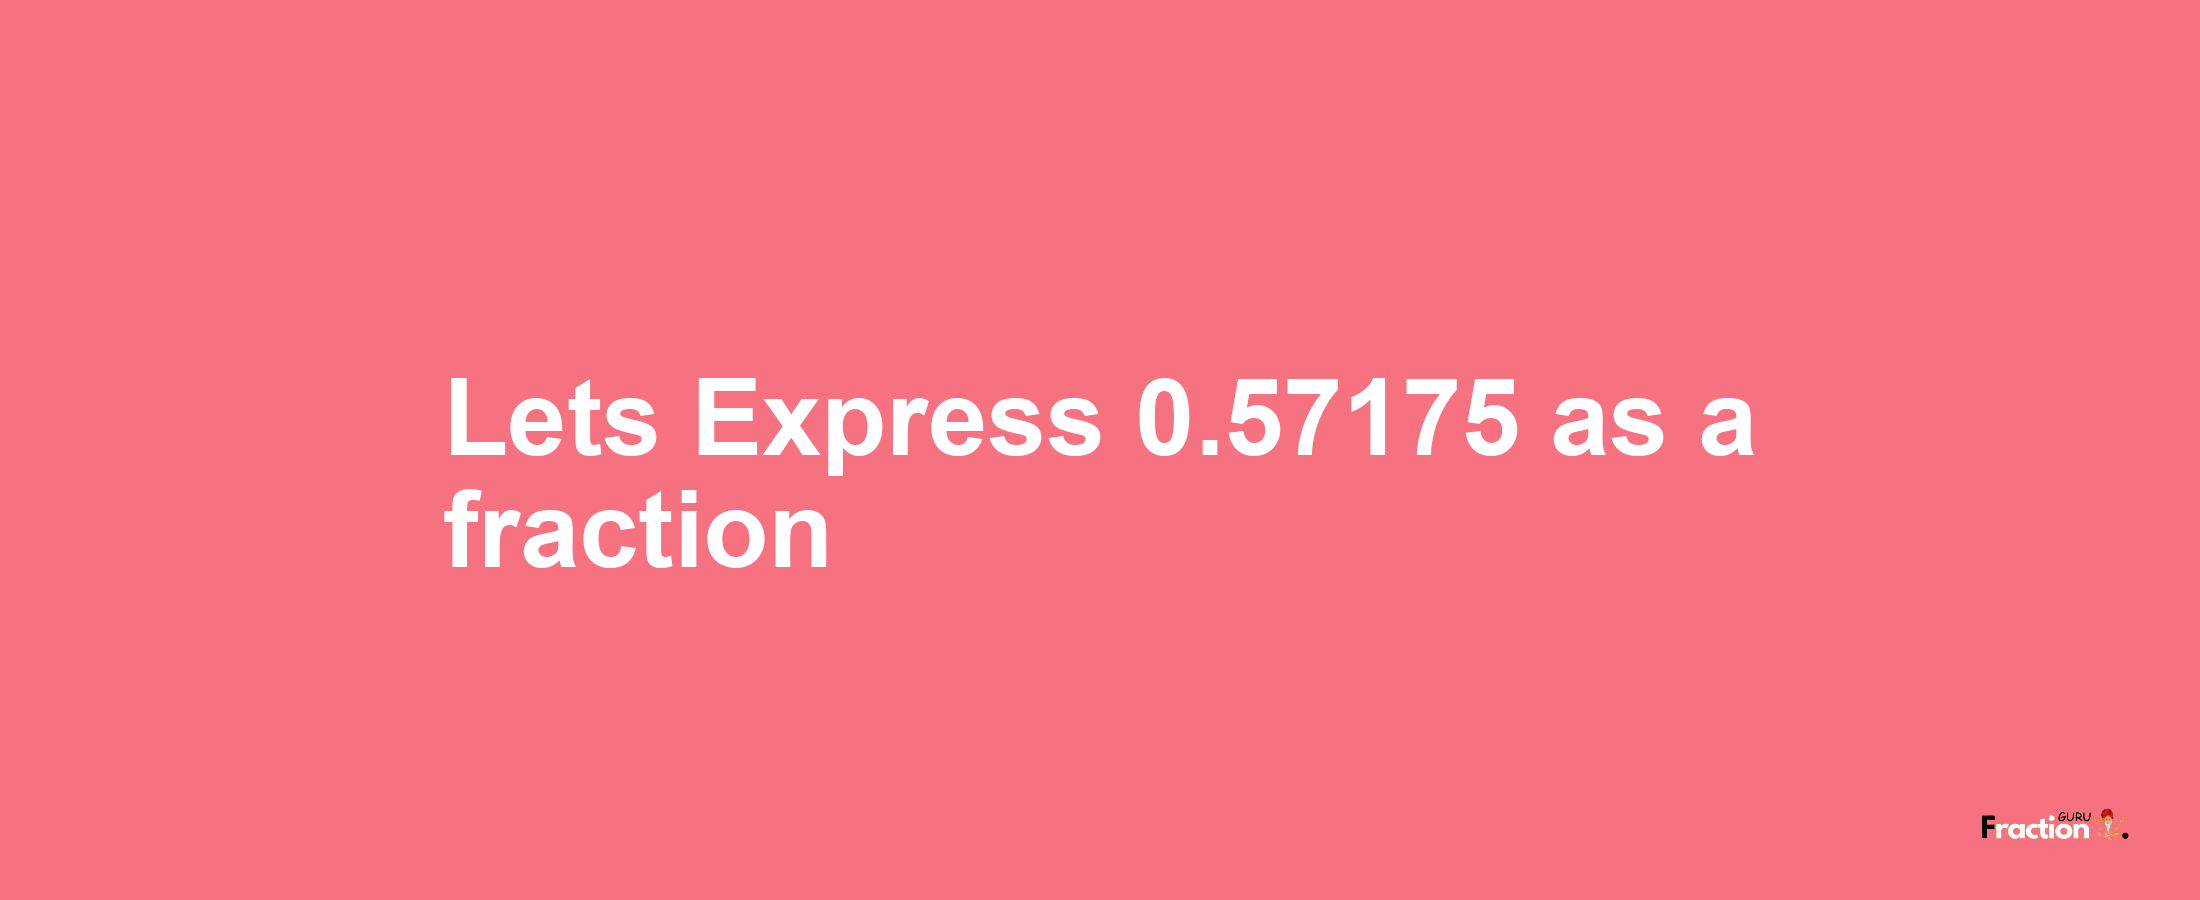 Lets Express 0.57175 as afraction